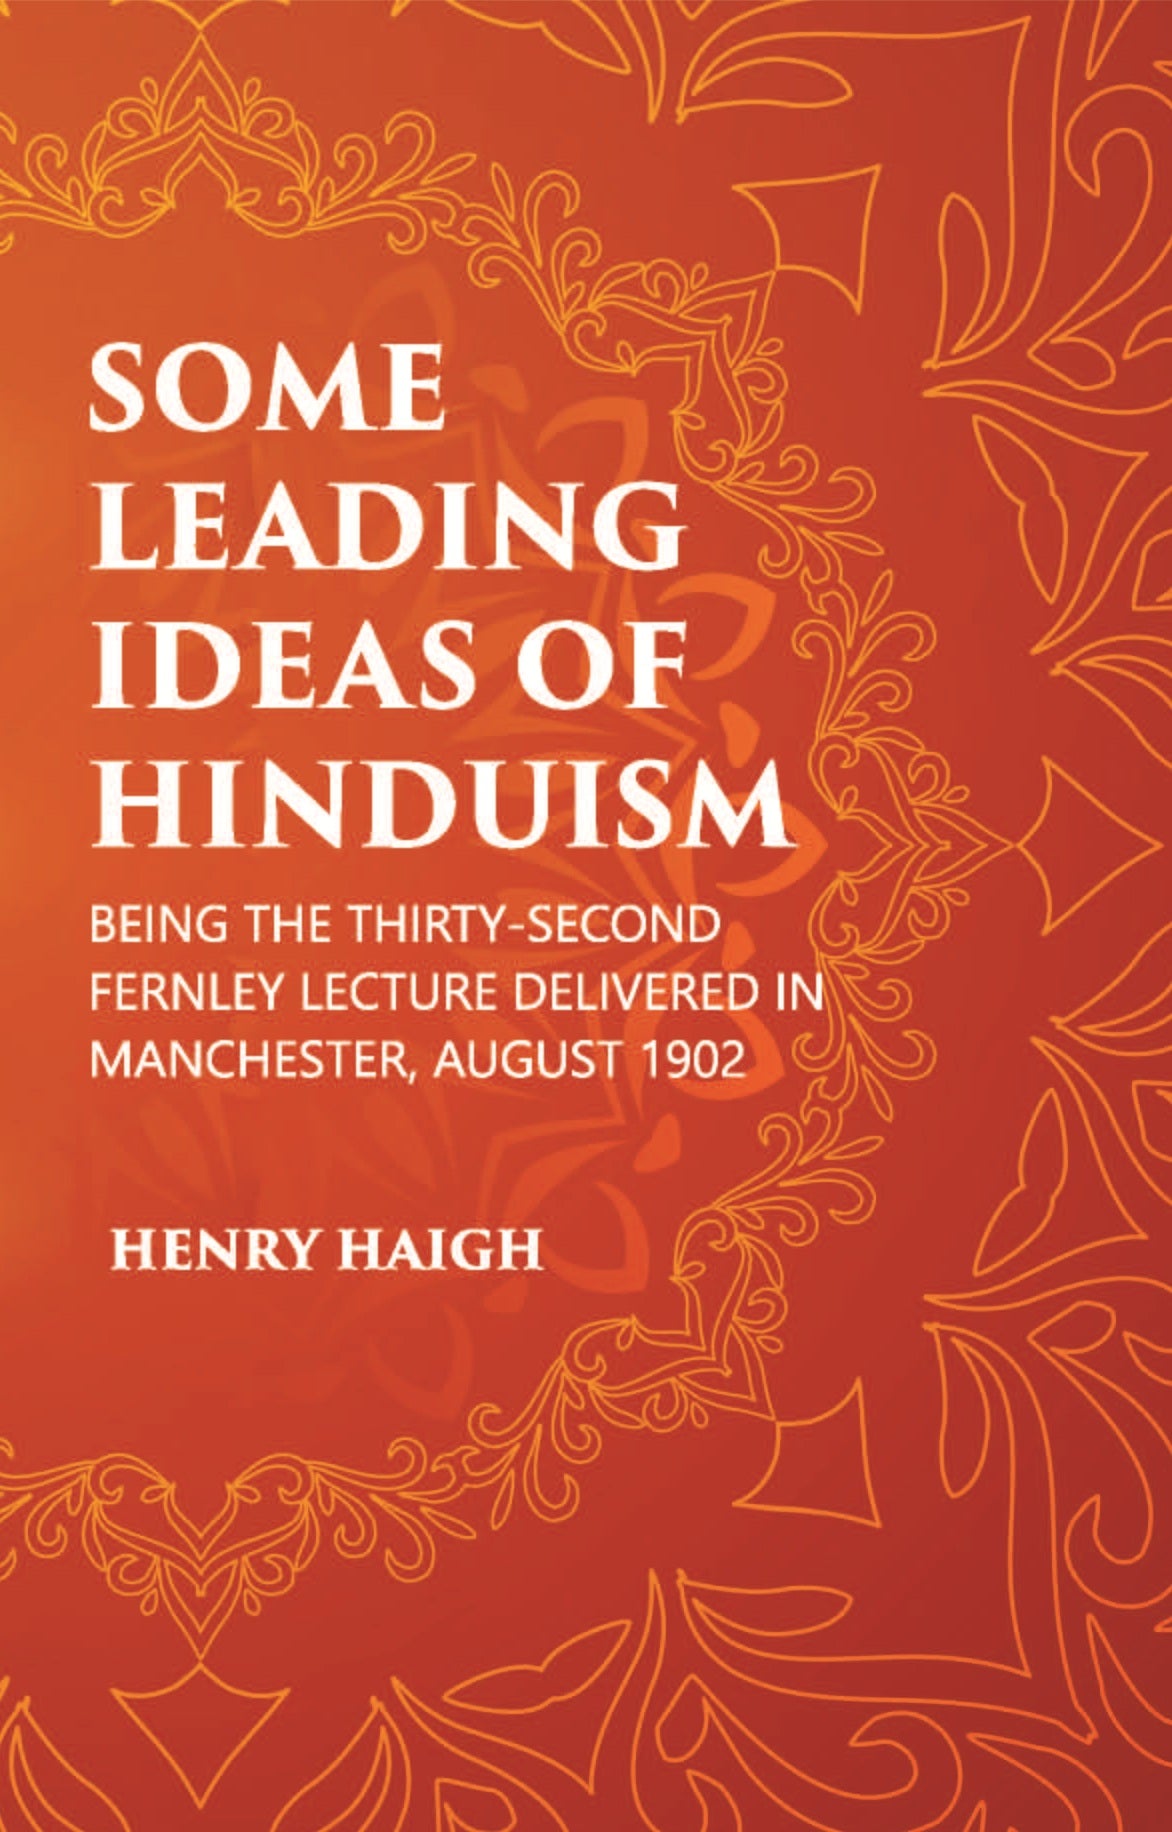 SOME LEADING IDEAS OF HINDUISM : BEING THE THIRTY-SECOND FERNLEY LECTURE DELIVERED IN MANCHESTER, AUGUST 1902